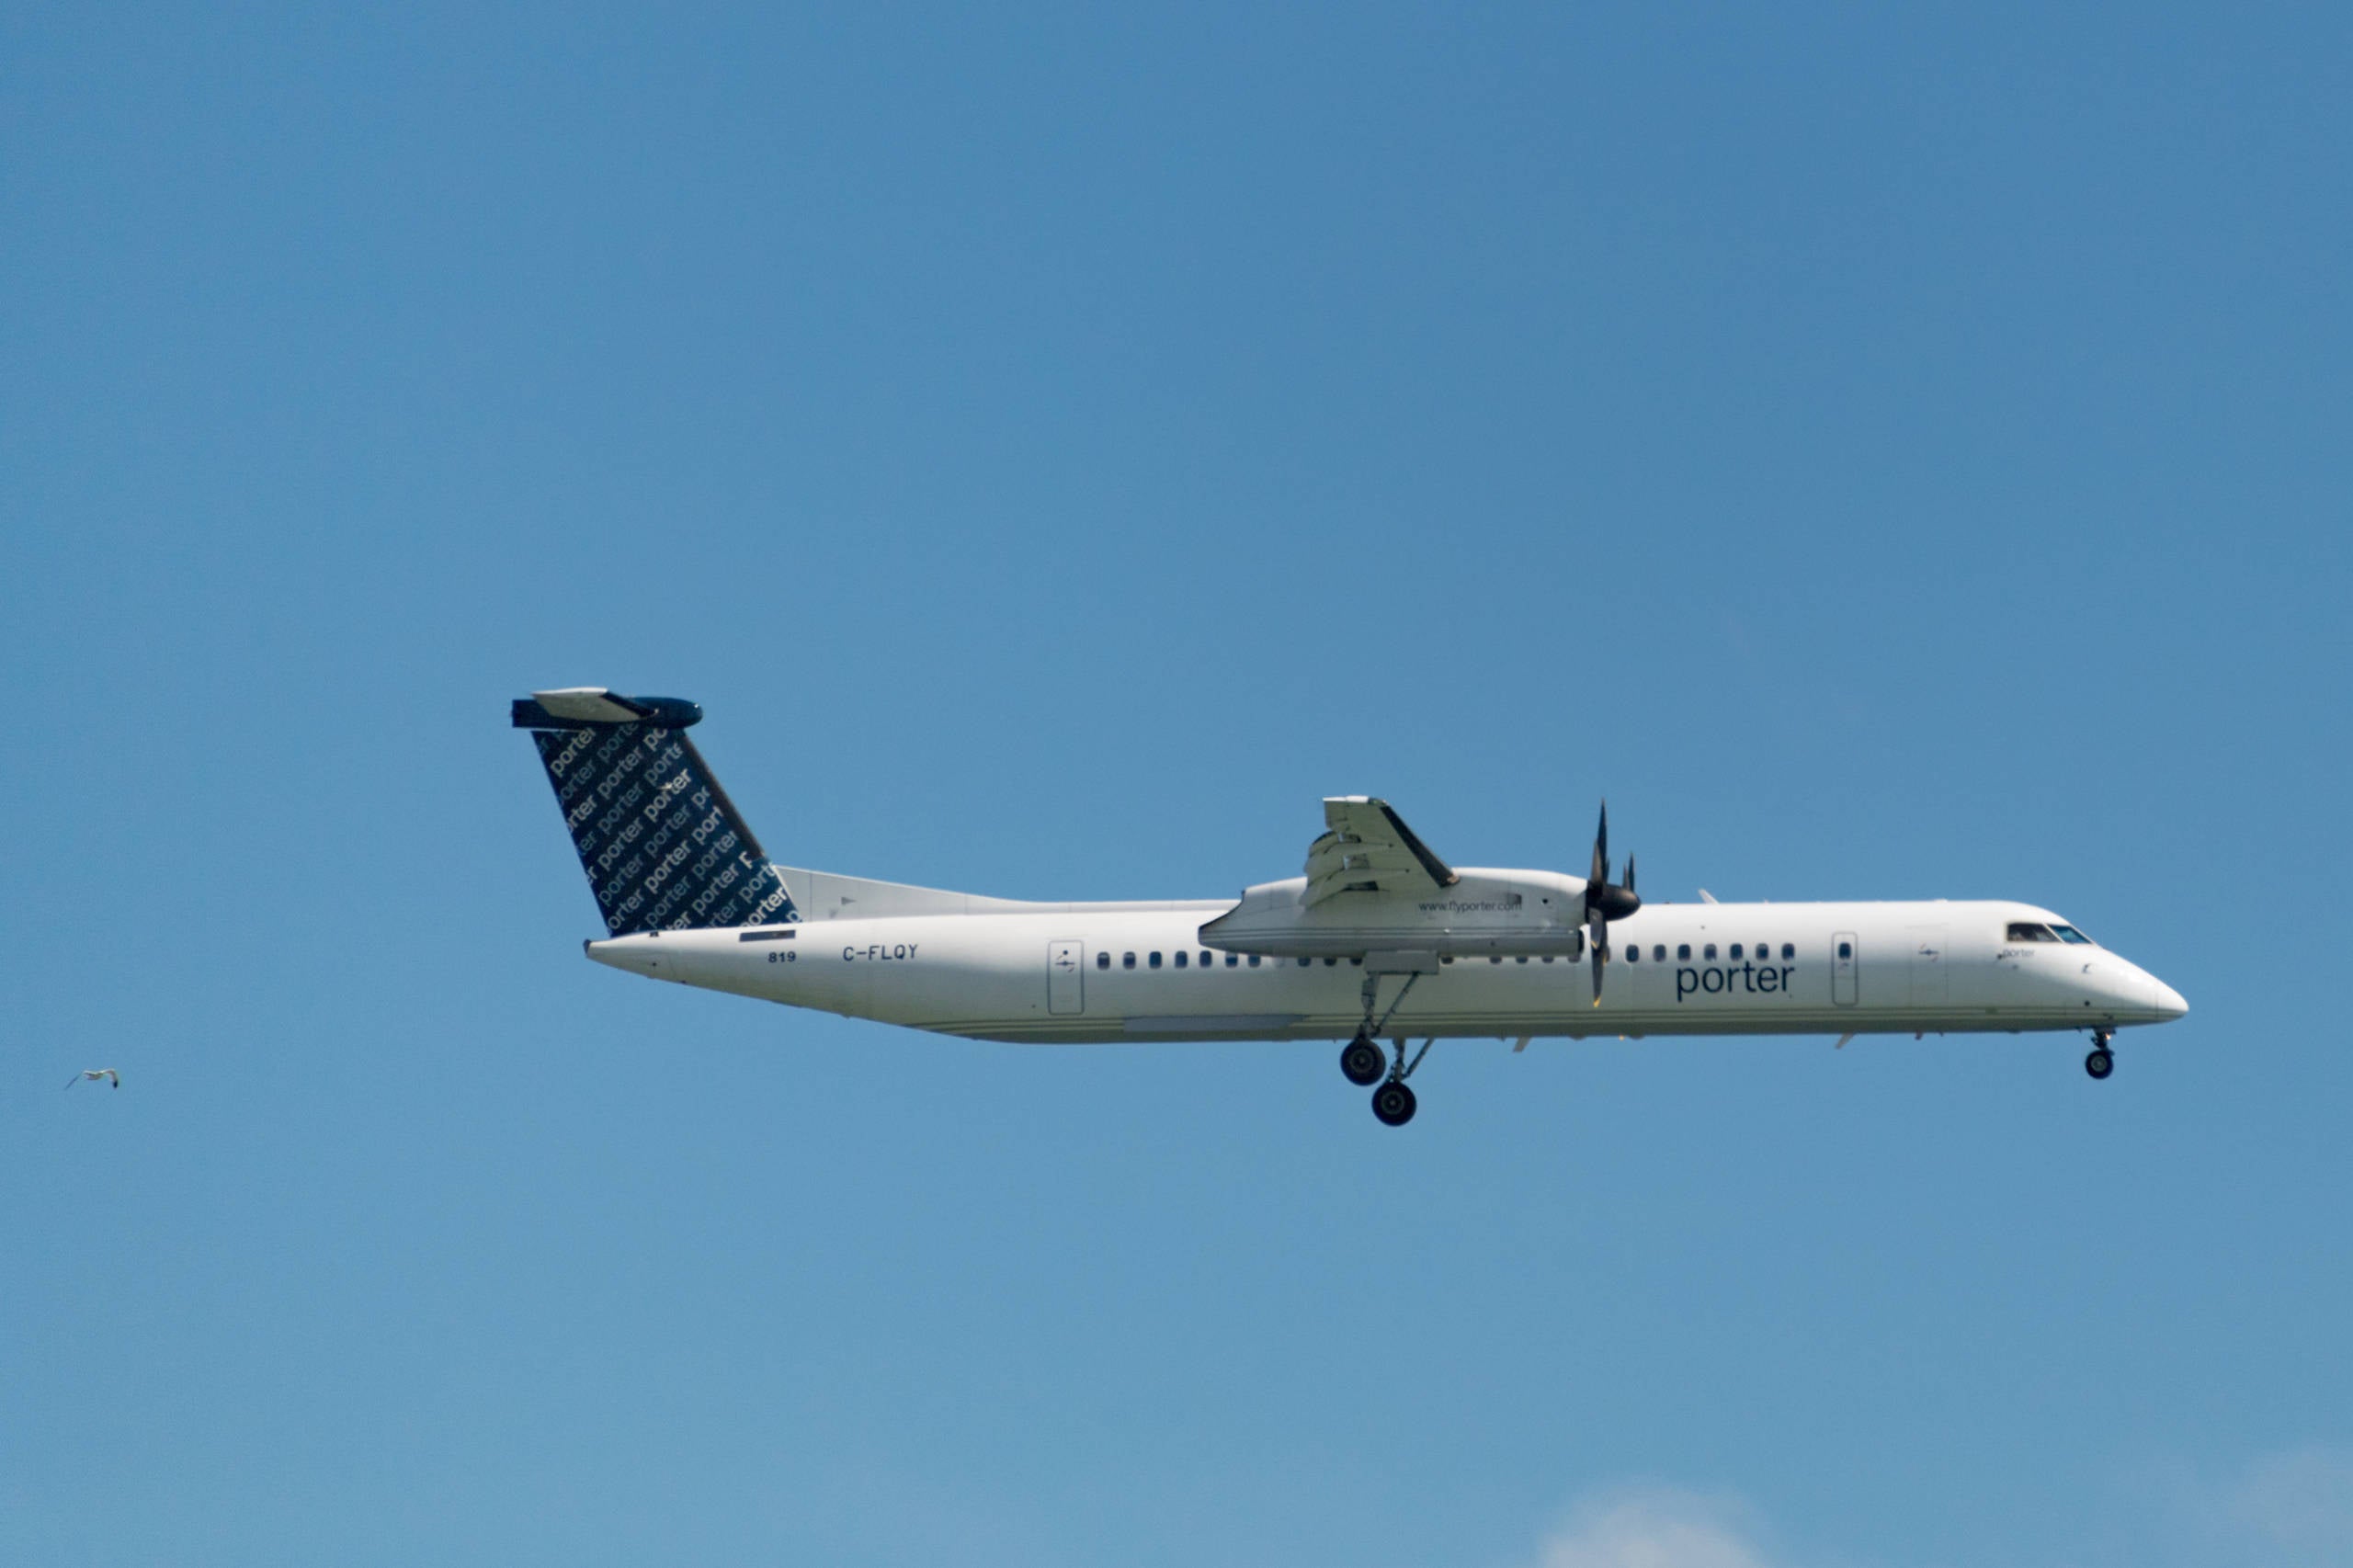 Porter Airlines aeroplane flying in the air, the sleek white